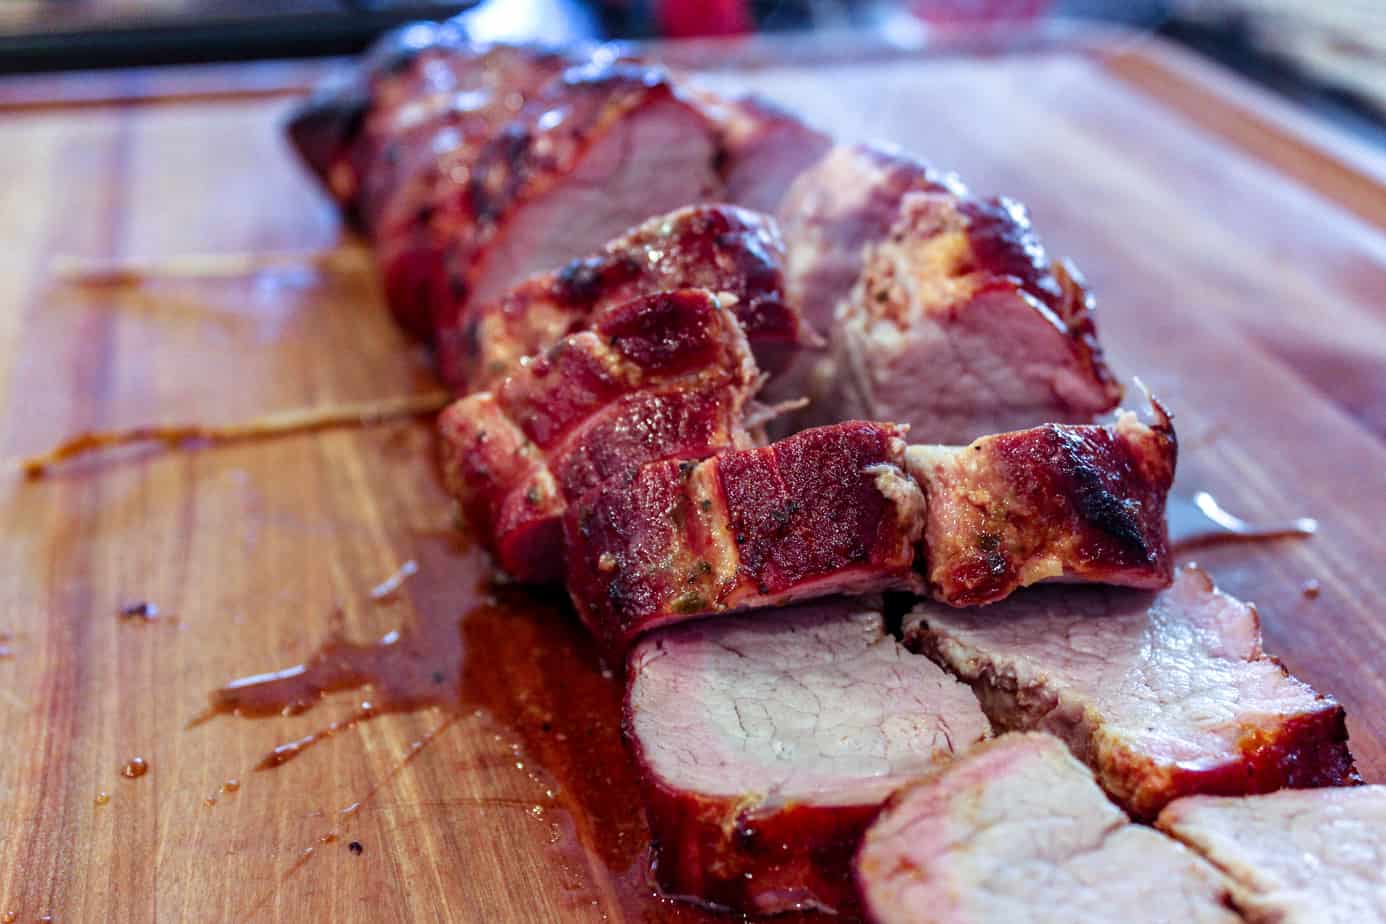 10 Smoked Meat Recipes - You've Gotta Try #8 - Smoked Meat Sunday